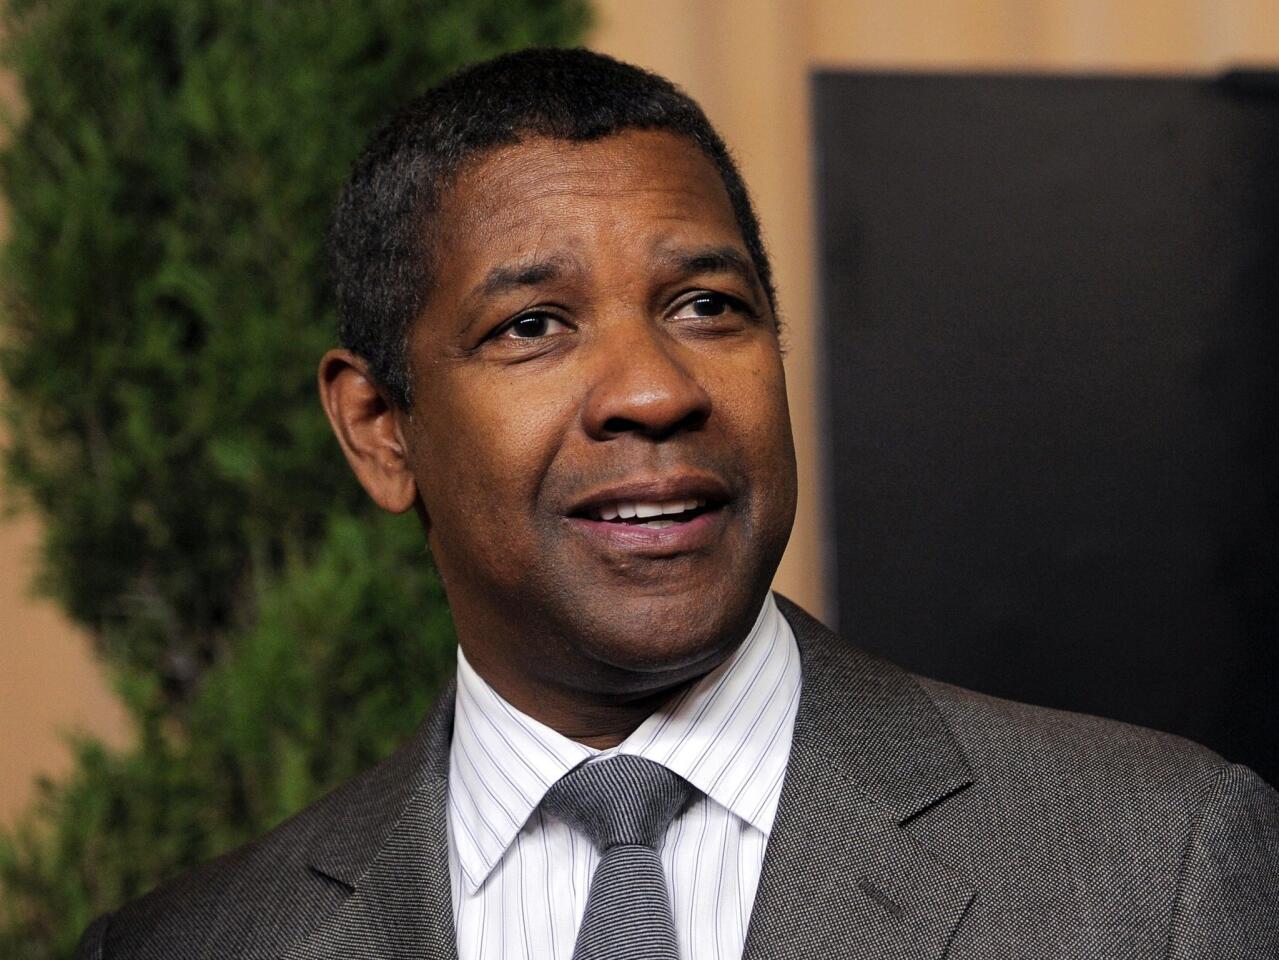 Denzel Washington, seen here in 2013, will receive the Maltin Modern Master Award at the 2017 Santa Barbara International Film Festival for his contributions to the industry.